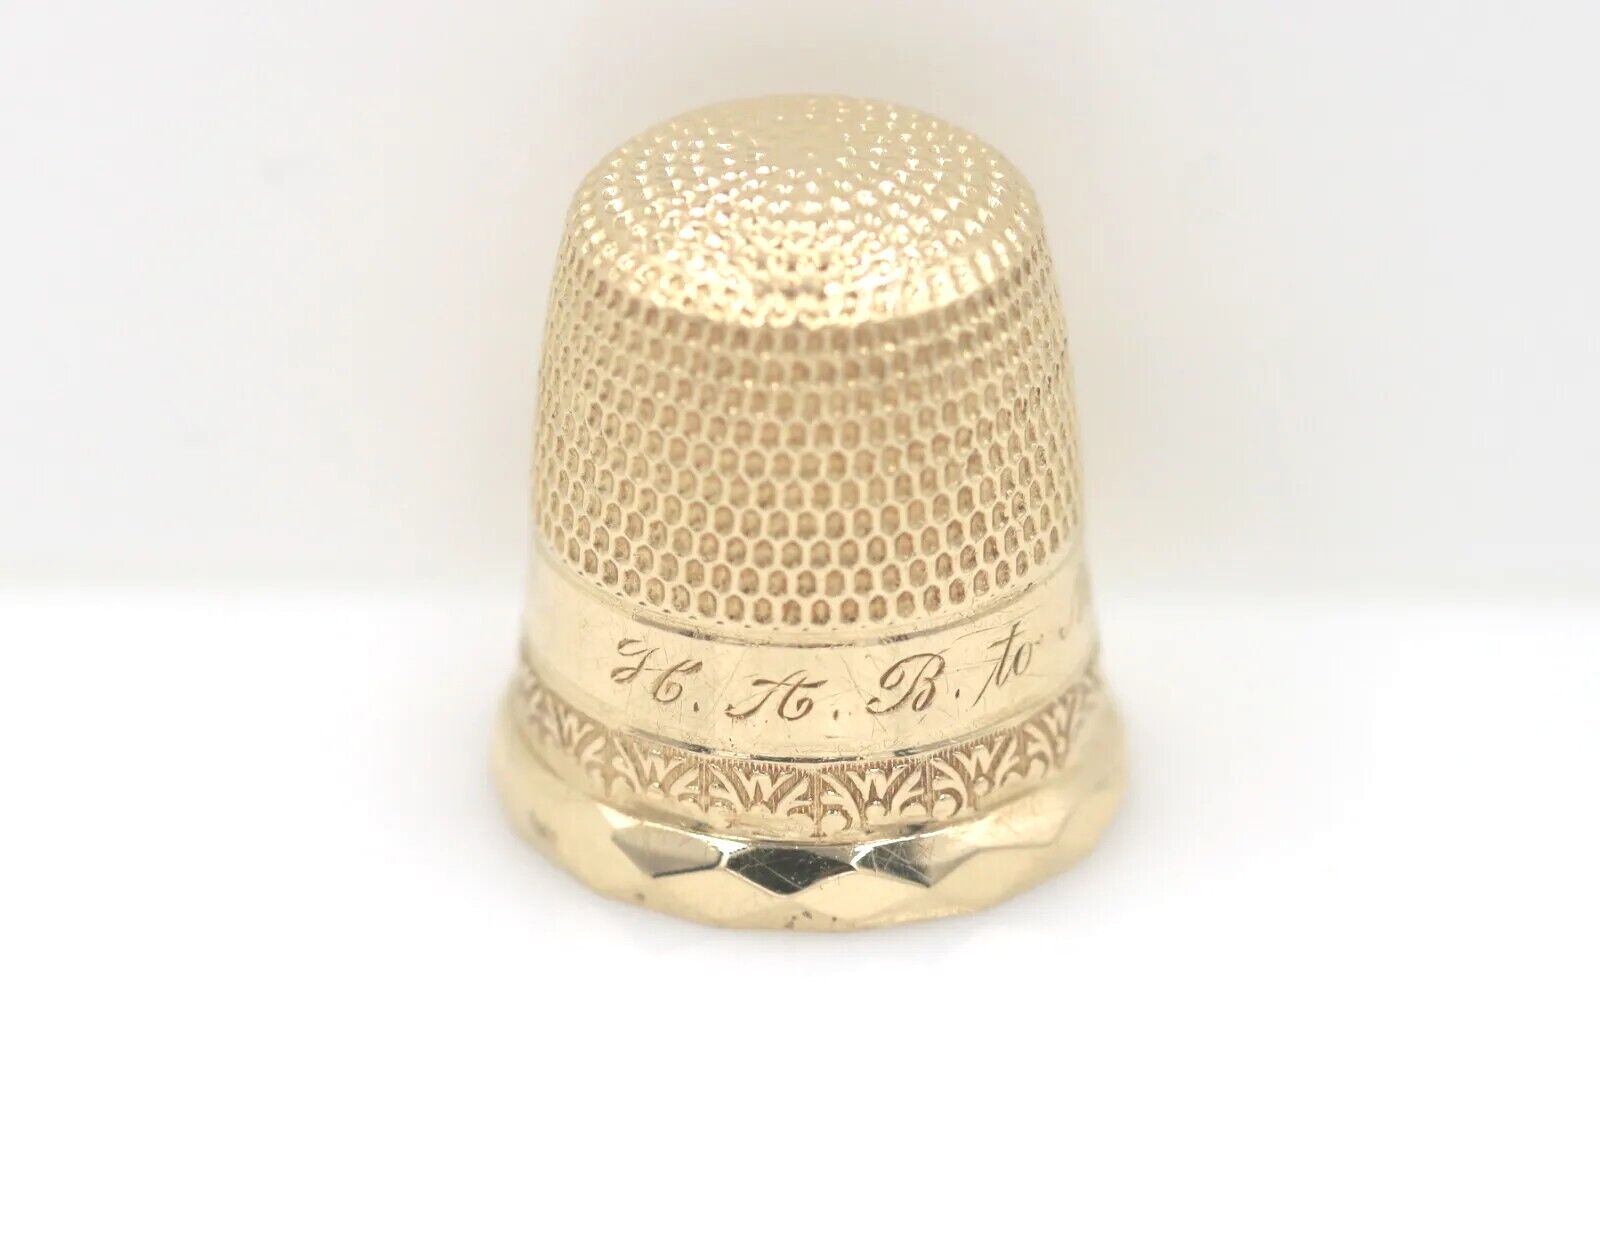 Stern Bros 14k Yellow Gold Size 9 Sewing Thimble Monogram Engraved Initials 4g